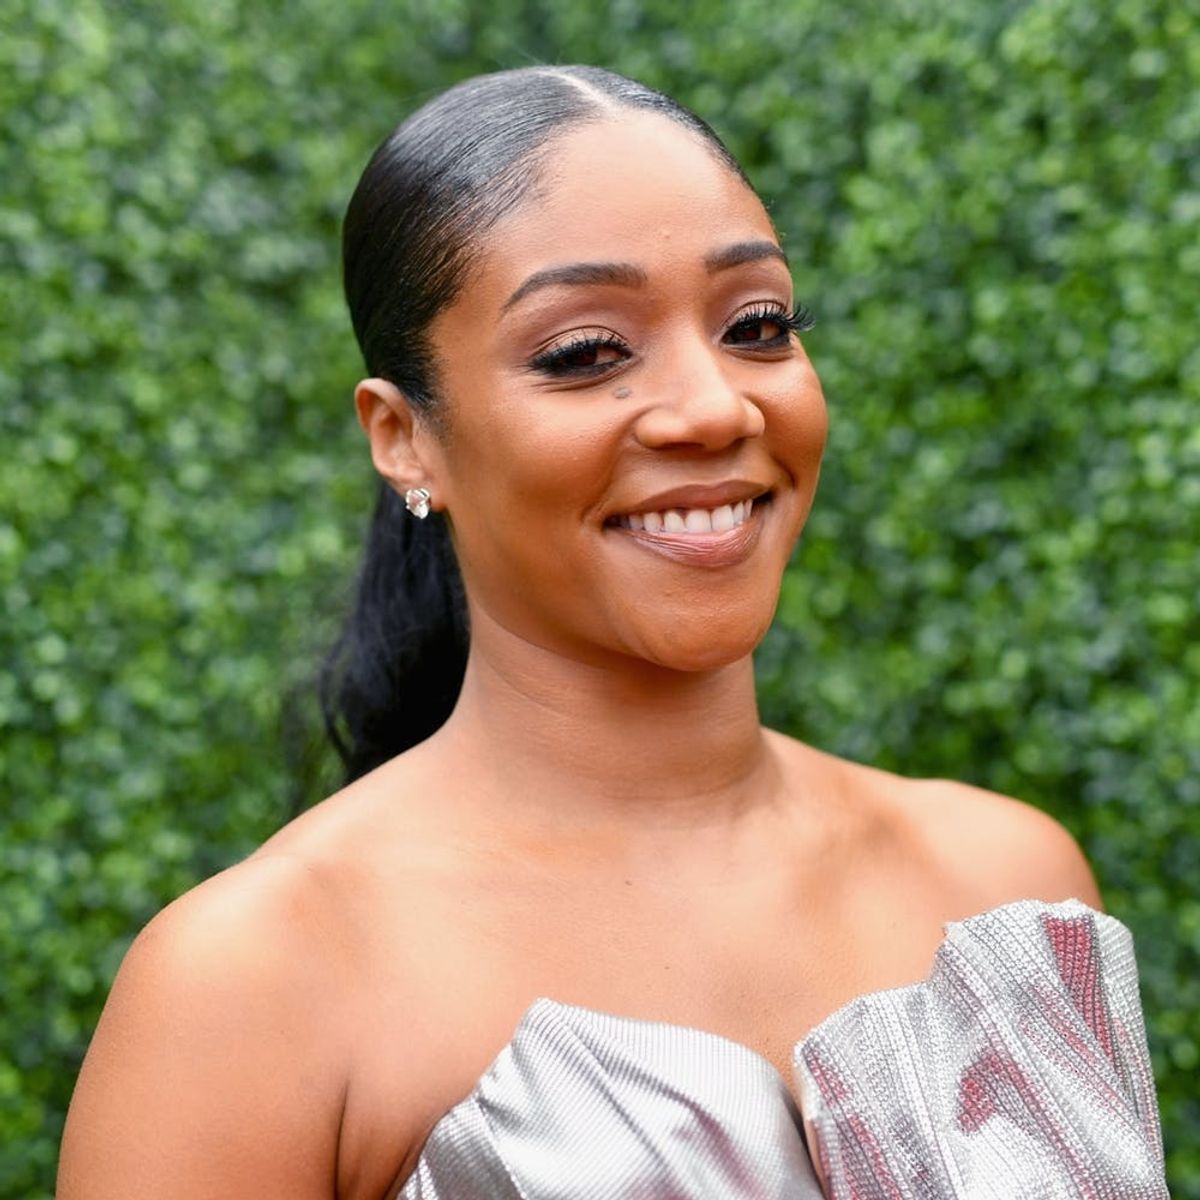 10 Fun Revelations from Tiffany Haddish’s ‘Vogue’ 73 Questions Video